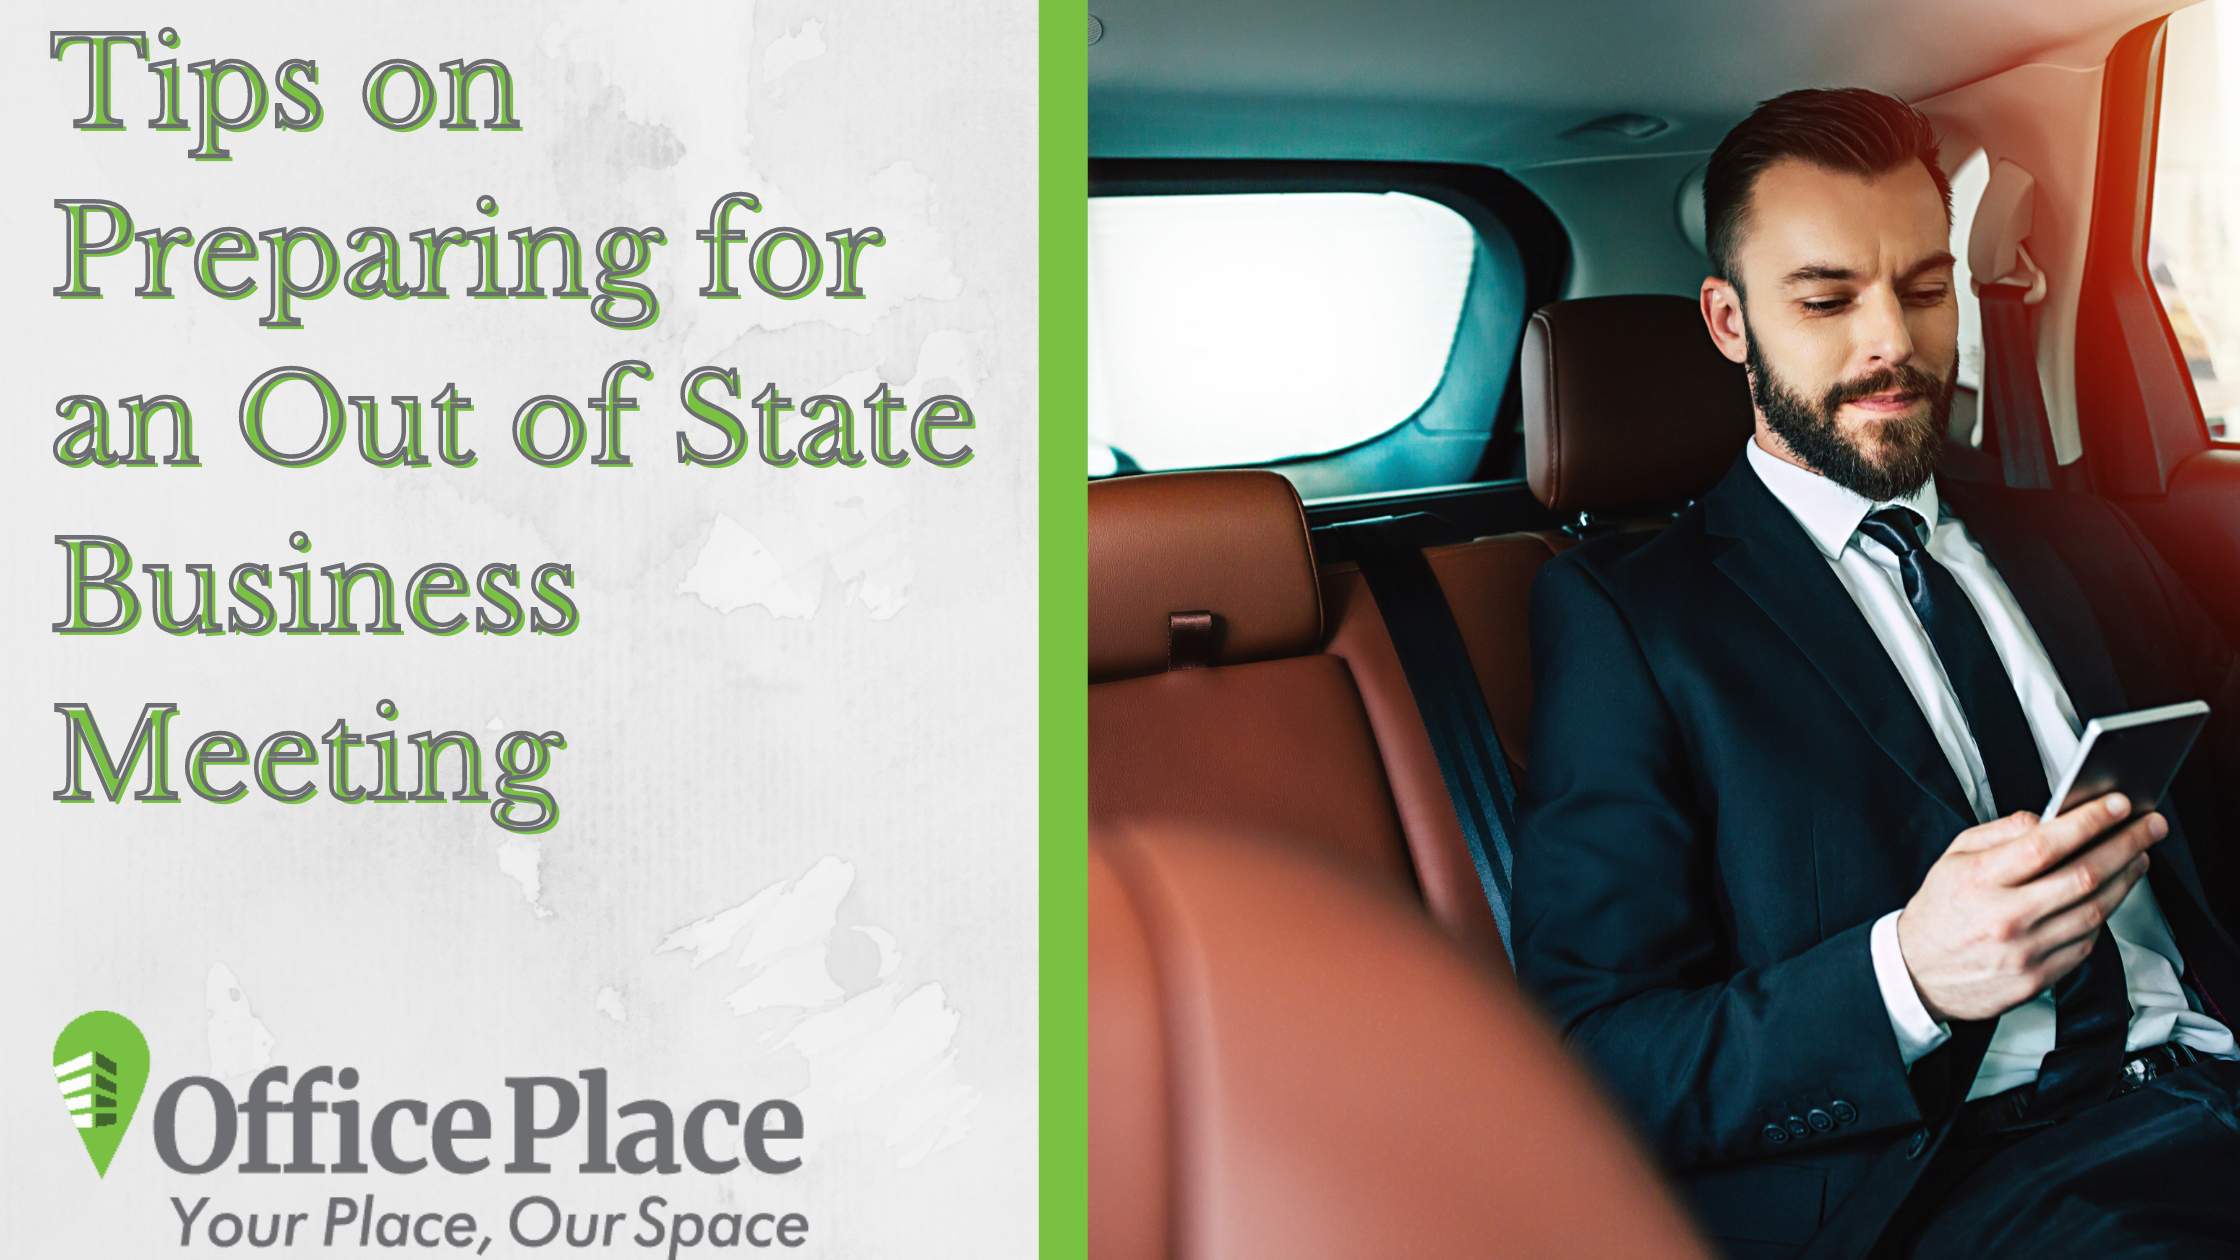 Tips on Preparing for an Out of State Business Meeting